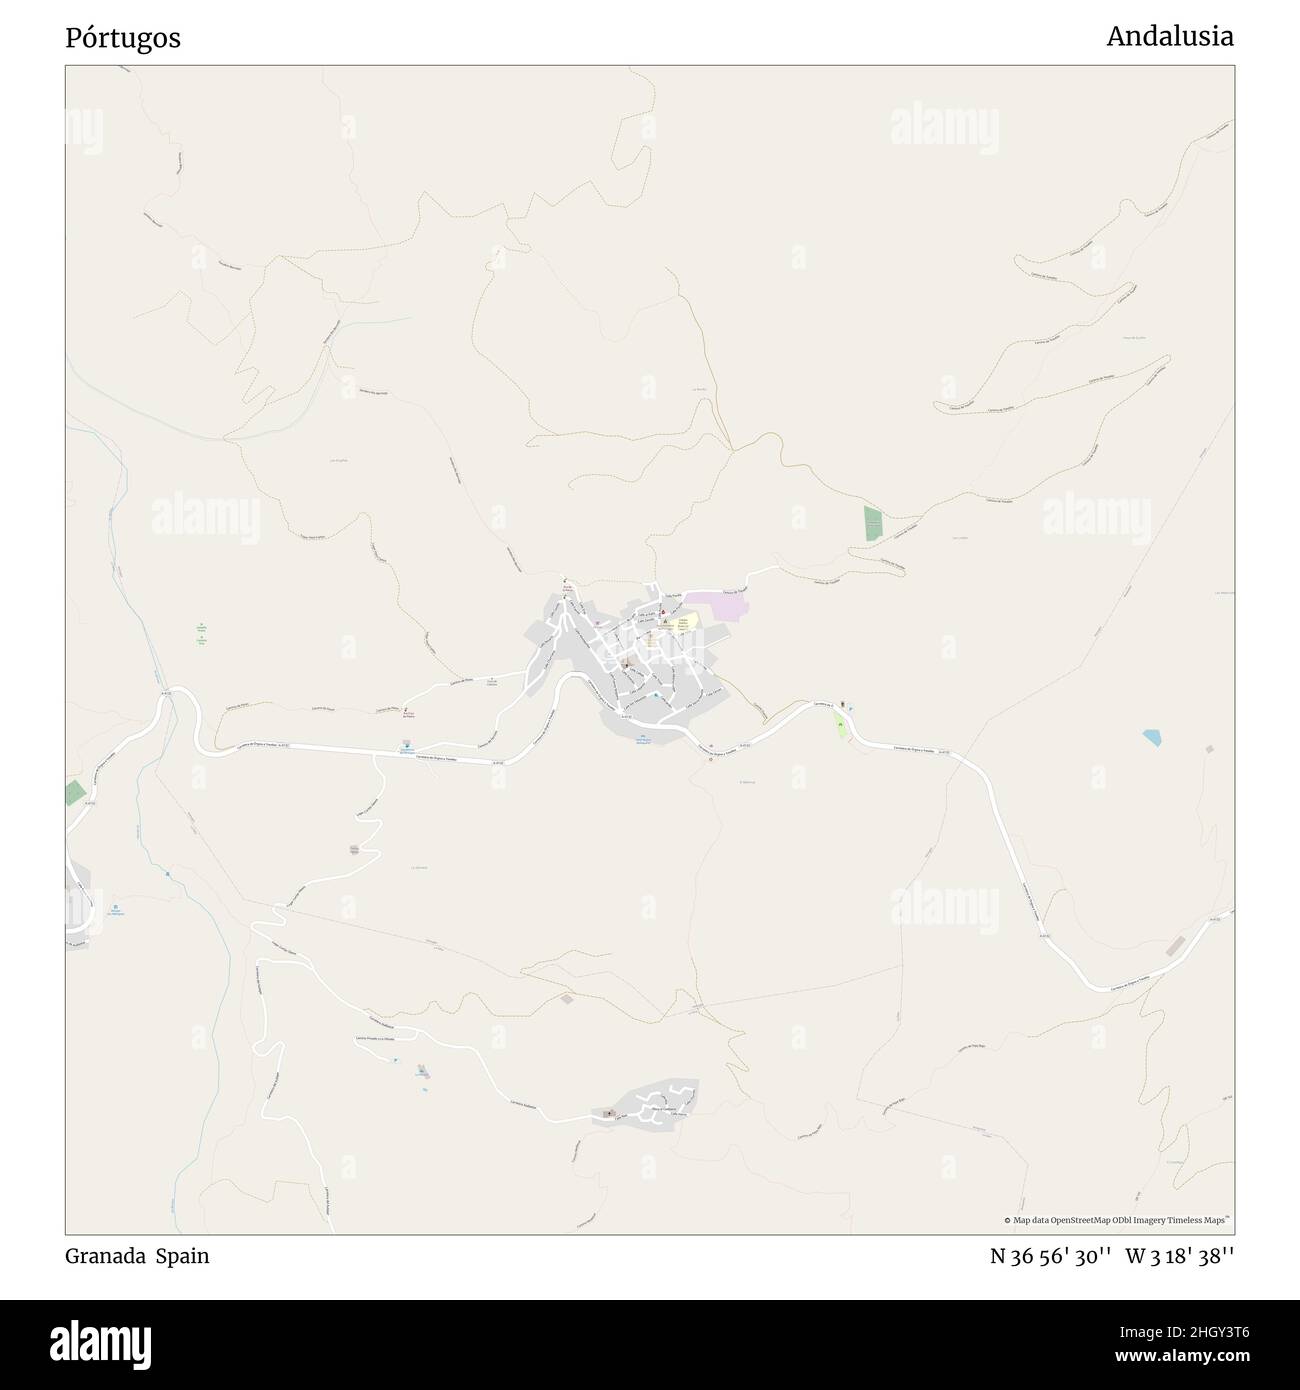 Pórtugos, Granada, Spain, Andalusia, N 36 56' 30'', W 3 18' 38'', map, Timeless Map published in 2021. Travelers, explorers and adventurers like Florence Nightingale, David Livingstone, Ernest Shackleton, Lewis and Clark and Sherlock Holmes relied on maps to plan travels to the world's most remote corners, Timeless Maps is mapping most locations on the globe, showing the achievement of great dreams Stock Photo